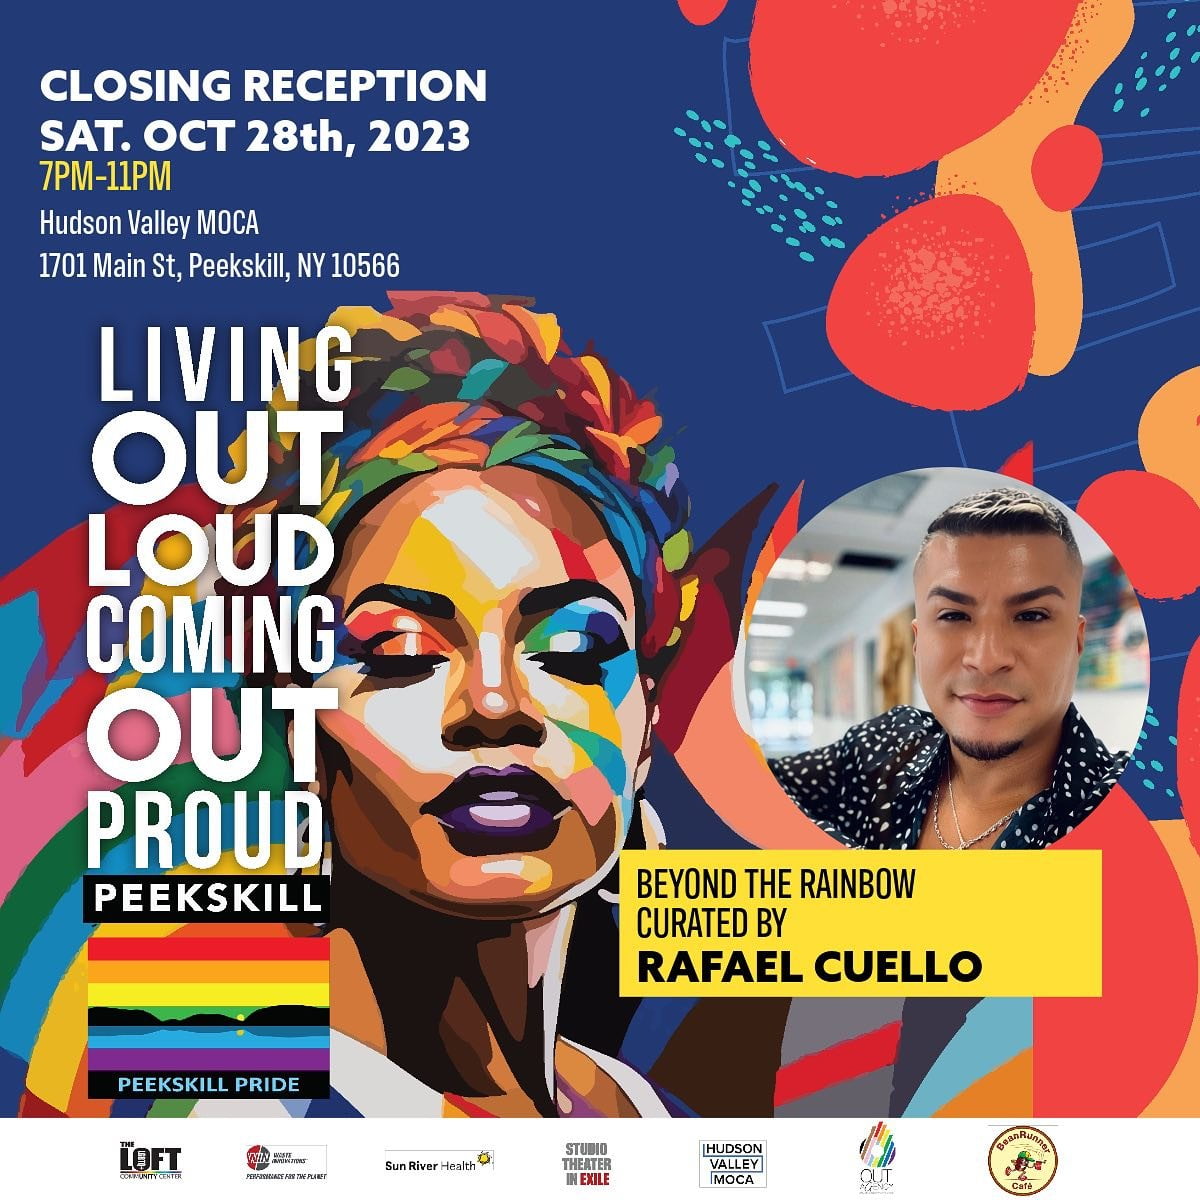 Flier for Living Out Loud art exhibit curated by Rafeal Cuello